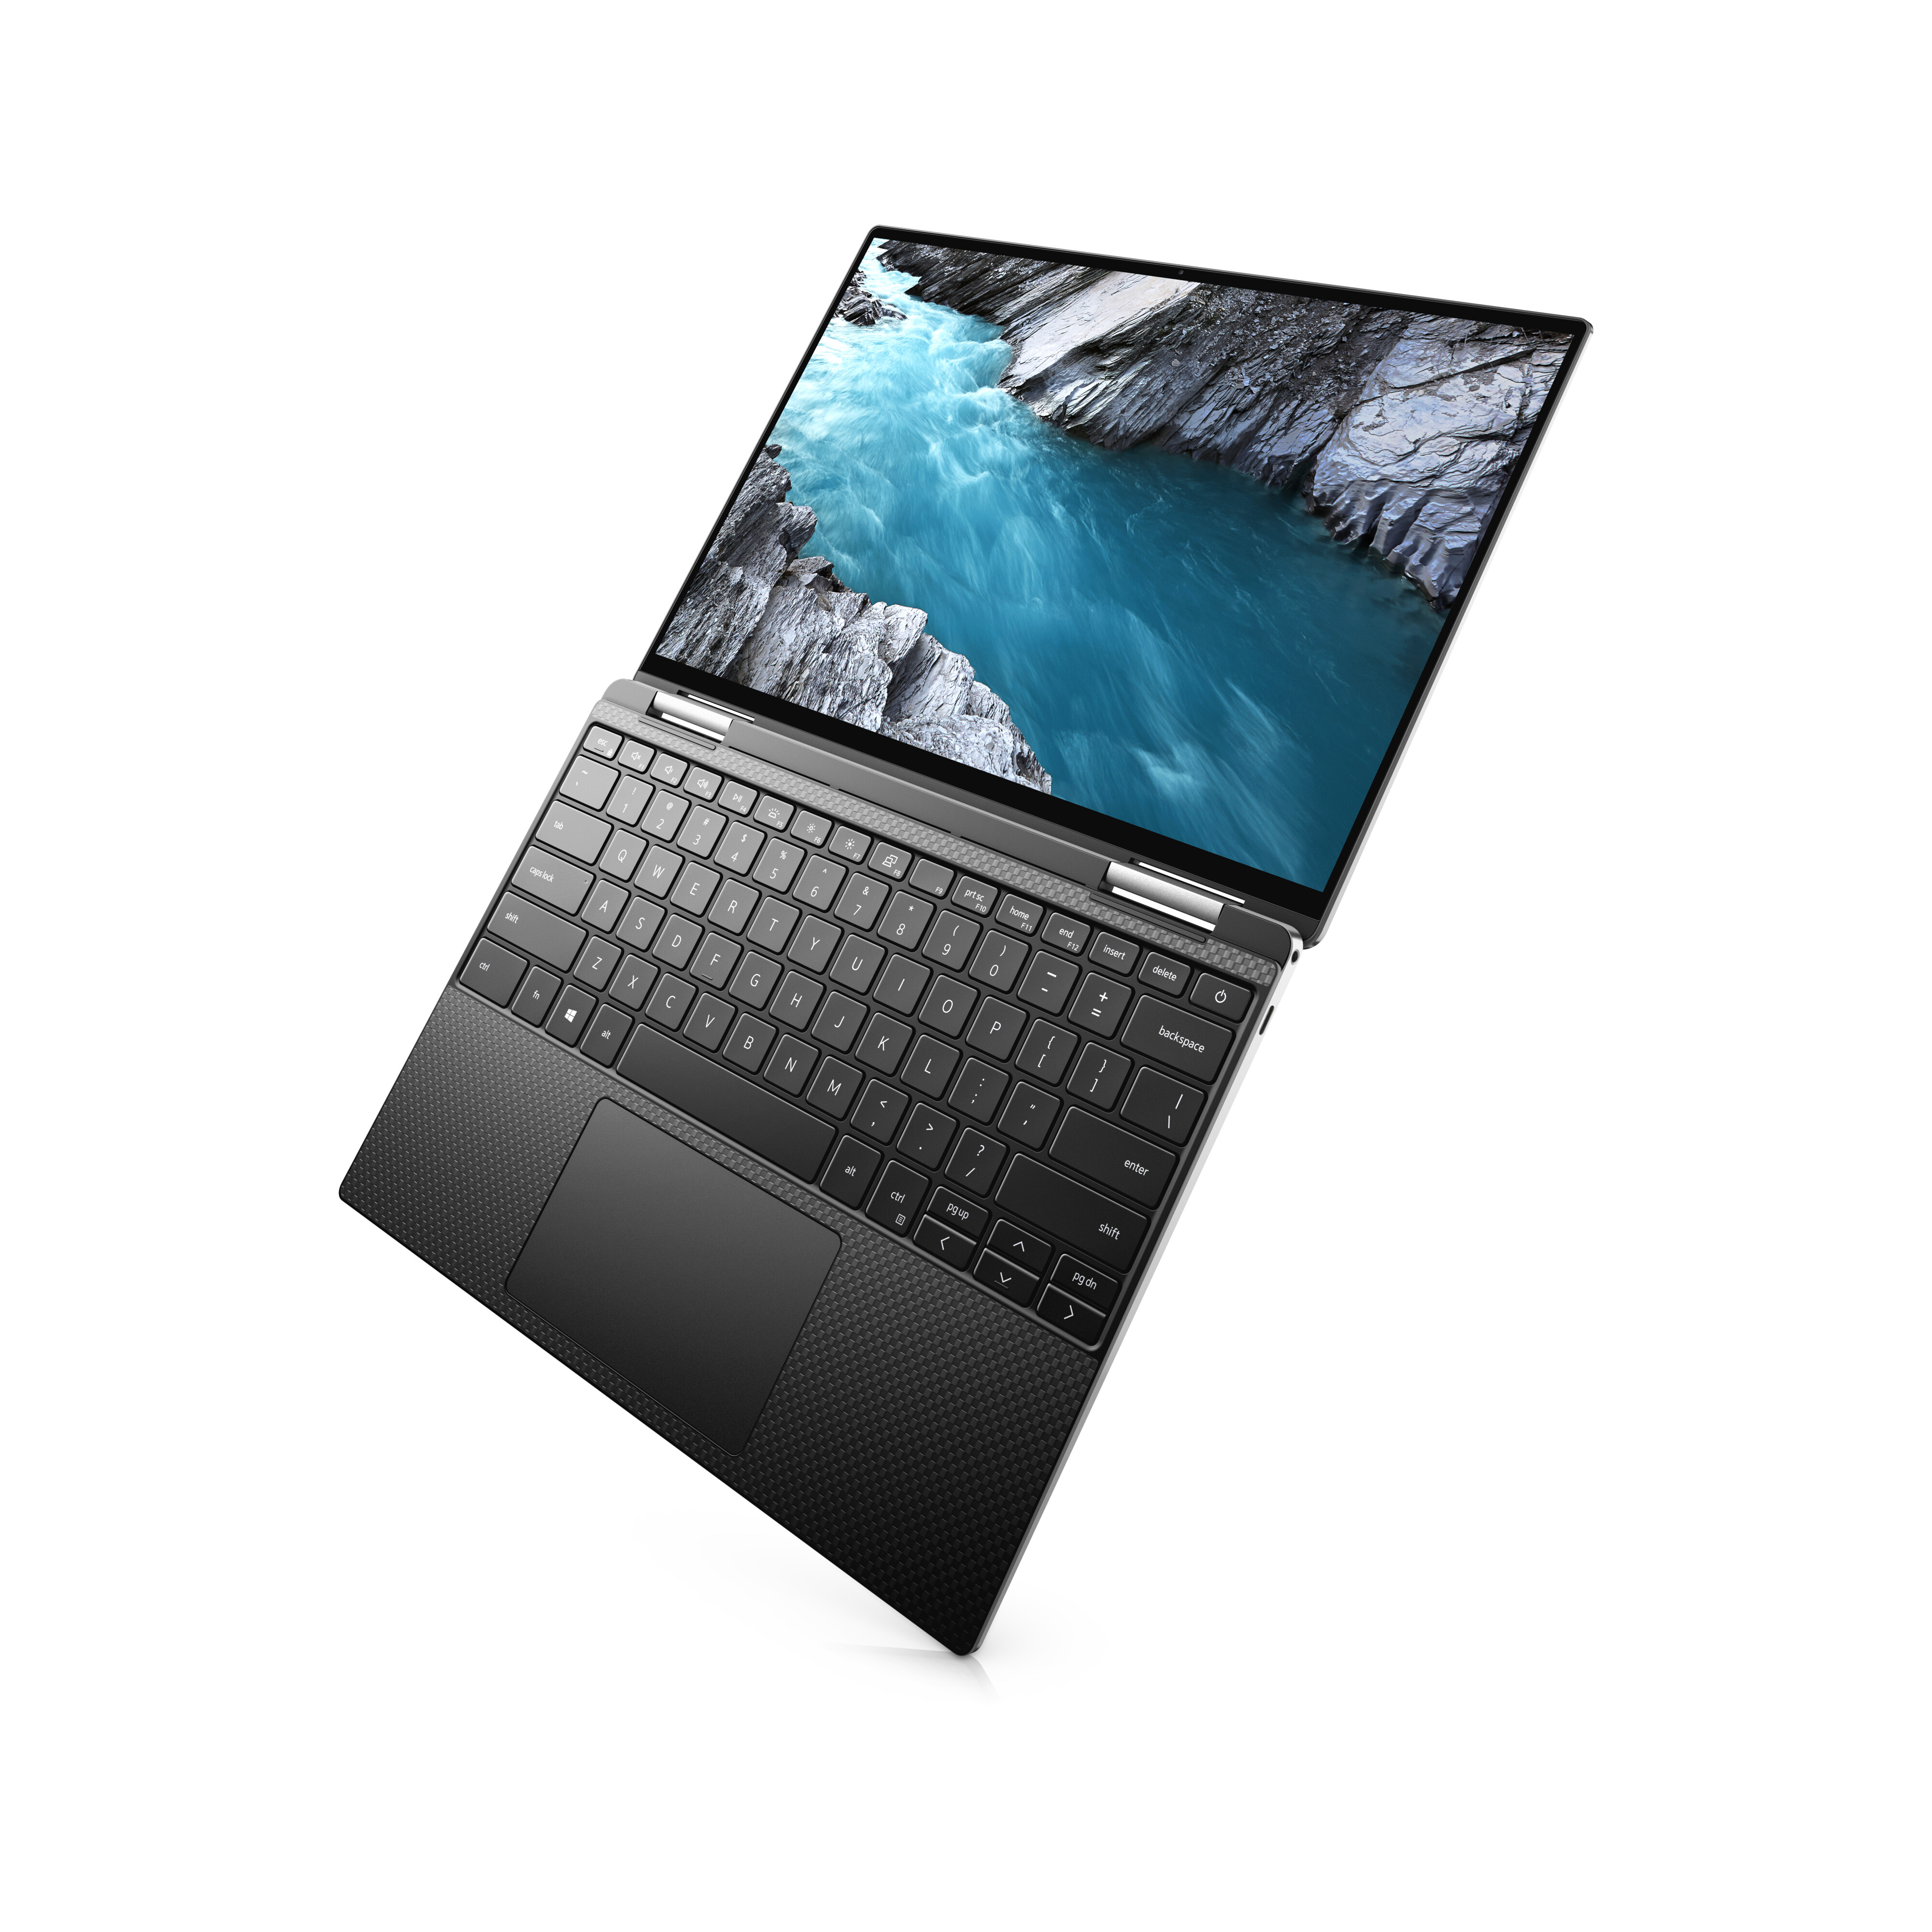 XPS 13 Inch 7390 2-in-1 Laptop with HDR Display & Dell Cinema ...